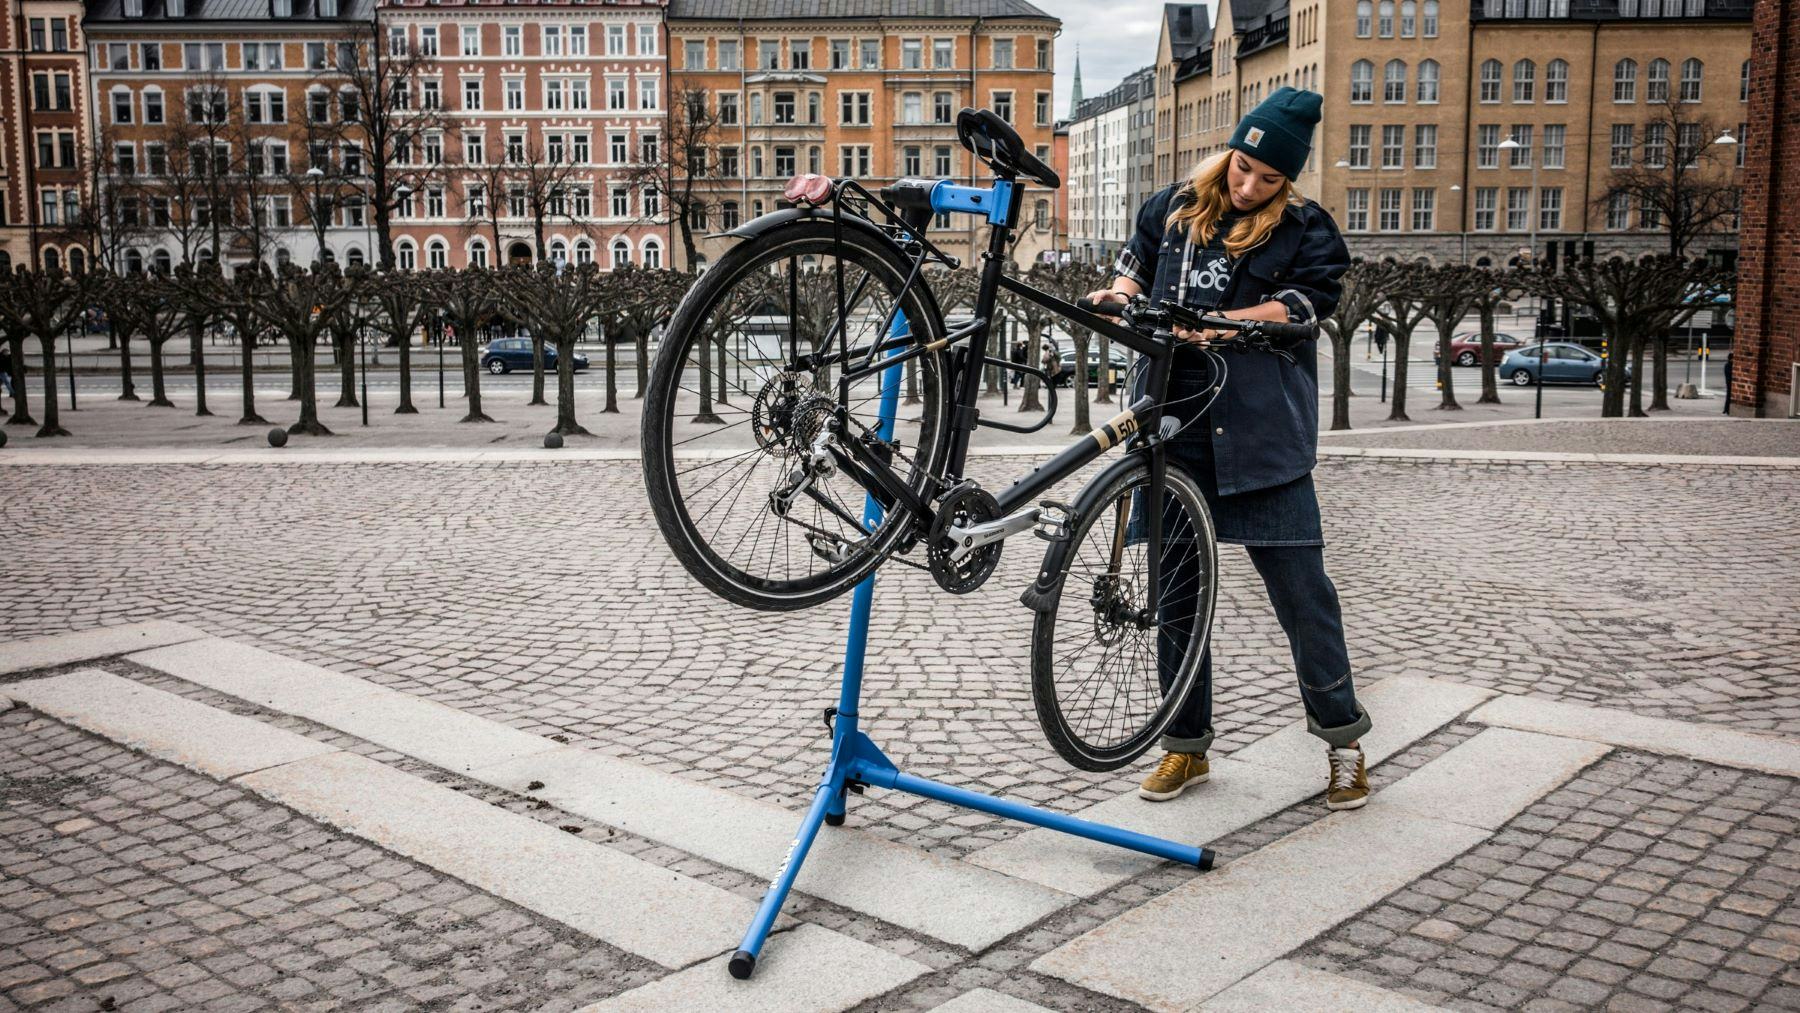 Established in 2019, Mioo has made a business of making it easier for cyclists to get their bikes fixed, checked, and ready for a ride. - Photo Mioo